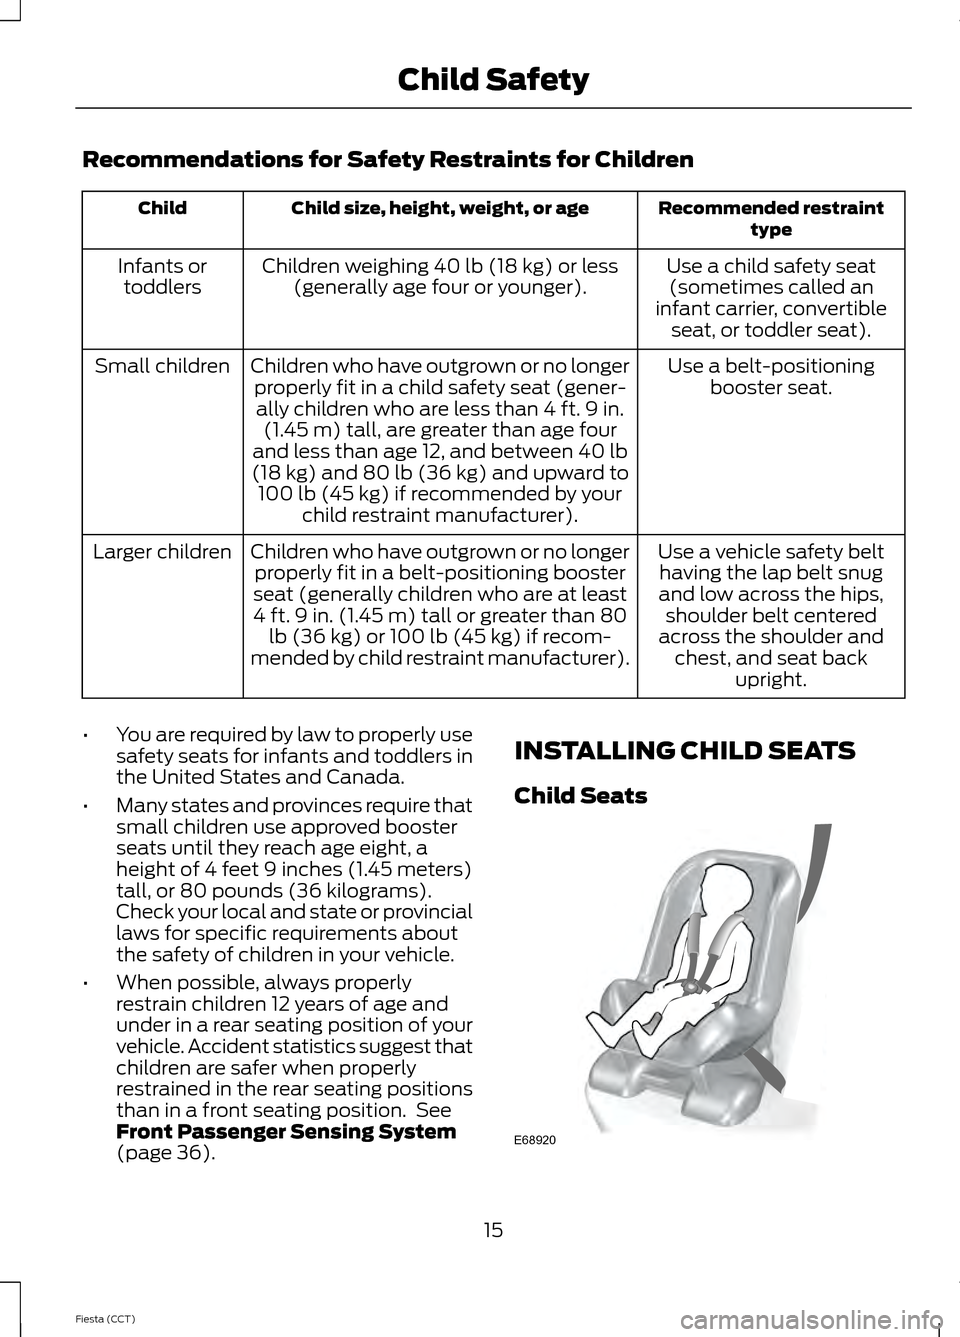 FORD FIESTA 2014 6.G User Guide Recommendations for Safety Restraints for Children
Recommended restraint
type
Child size, height, weight, or age
Child
Use a child safety seat(sometimes called an
infant carrier, convertible seat, or 